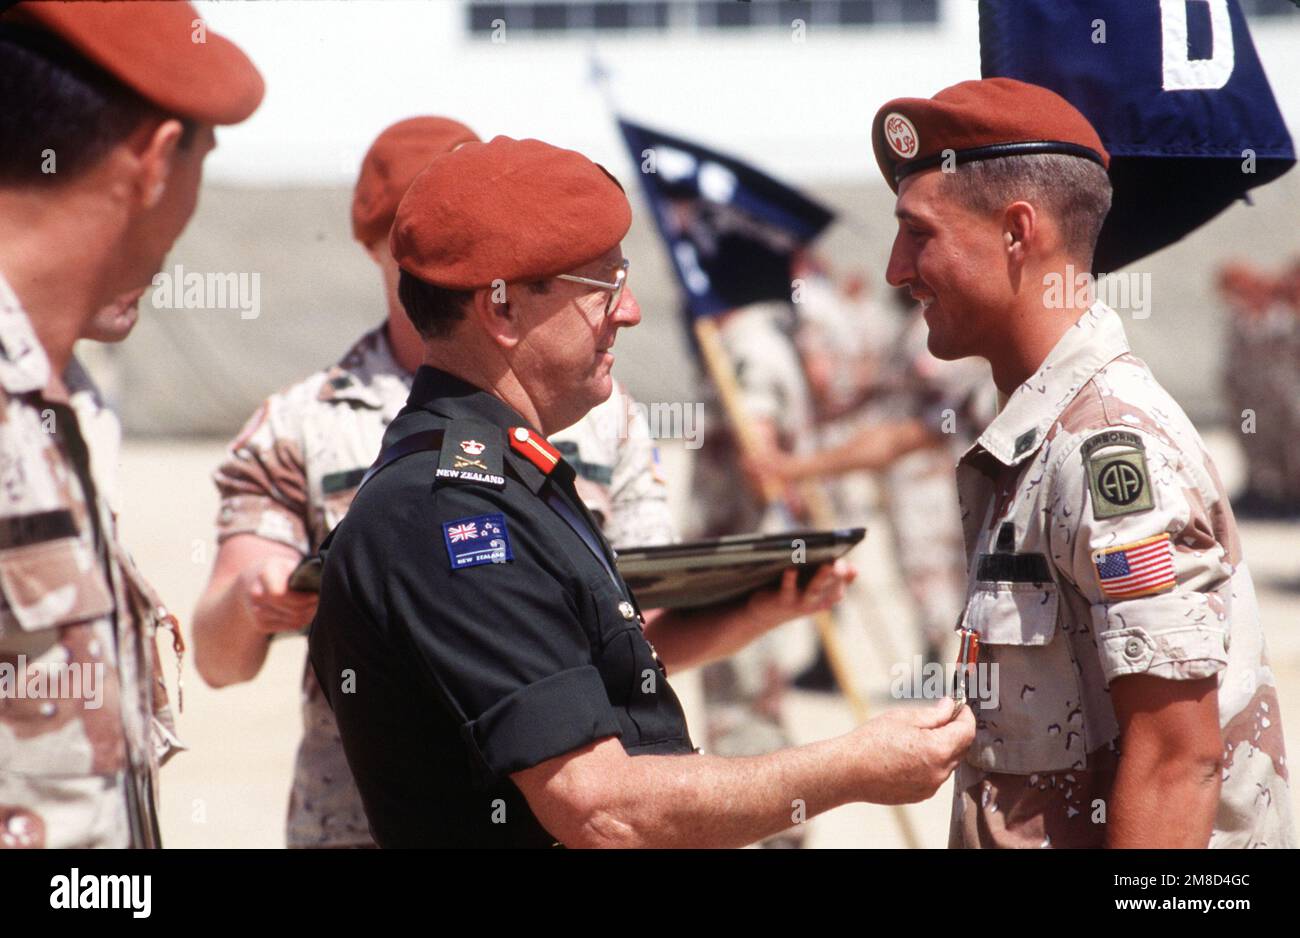 LGEN D. S. McGiver of New Zealand, commander, Multinational Force and Observers (MFO), presents an MFO Medal to a soldier from 2nd Bn., 505th Inf., 82nd Airborne Div., during a ceremony at the MFO South Camp. The battalion is being relieved by 1ST Bn., 17th Inf., 6th Inf. Div., after serving six months with the MFO peacekeepers on the Sinai Peninsula. Base: Sharm El Sheikh Country: Egypt (EGY) Stock Photo